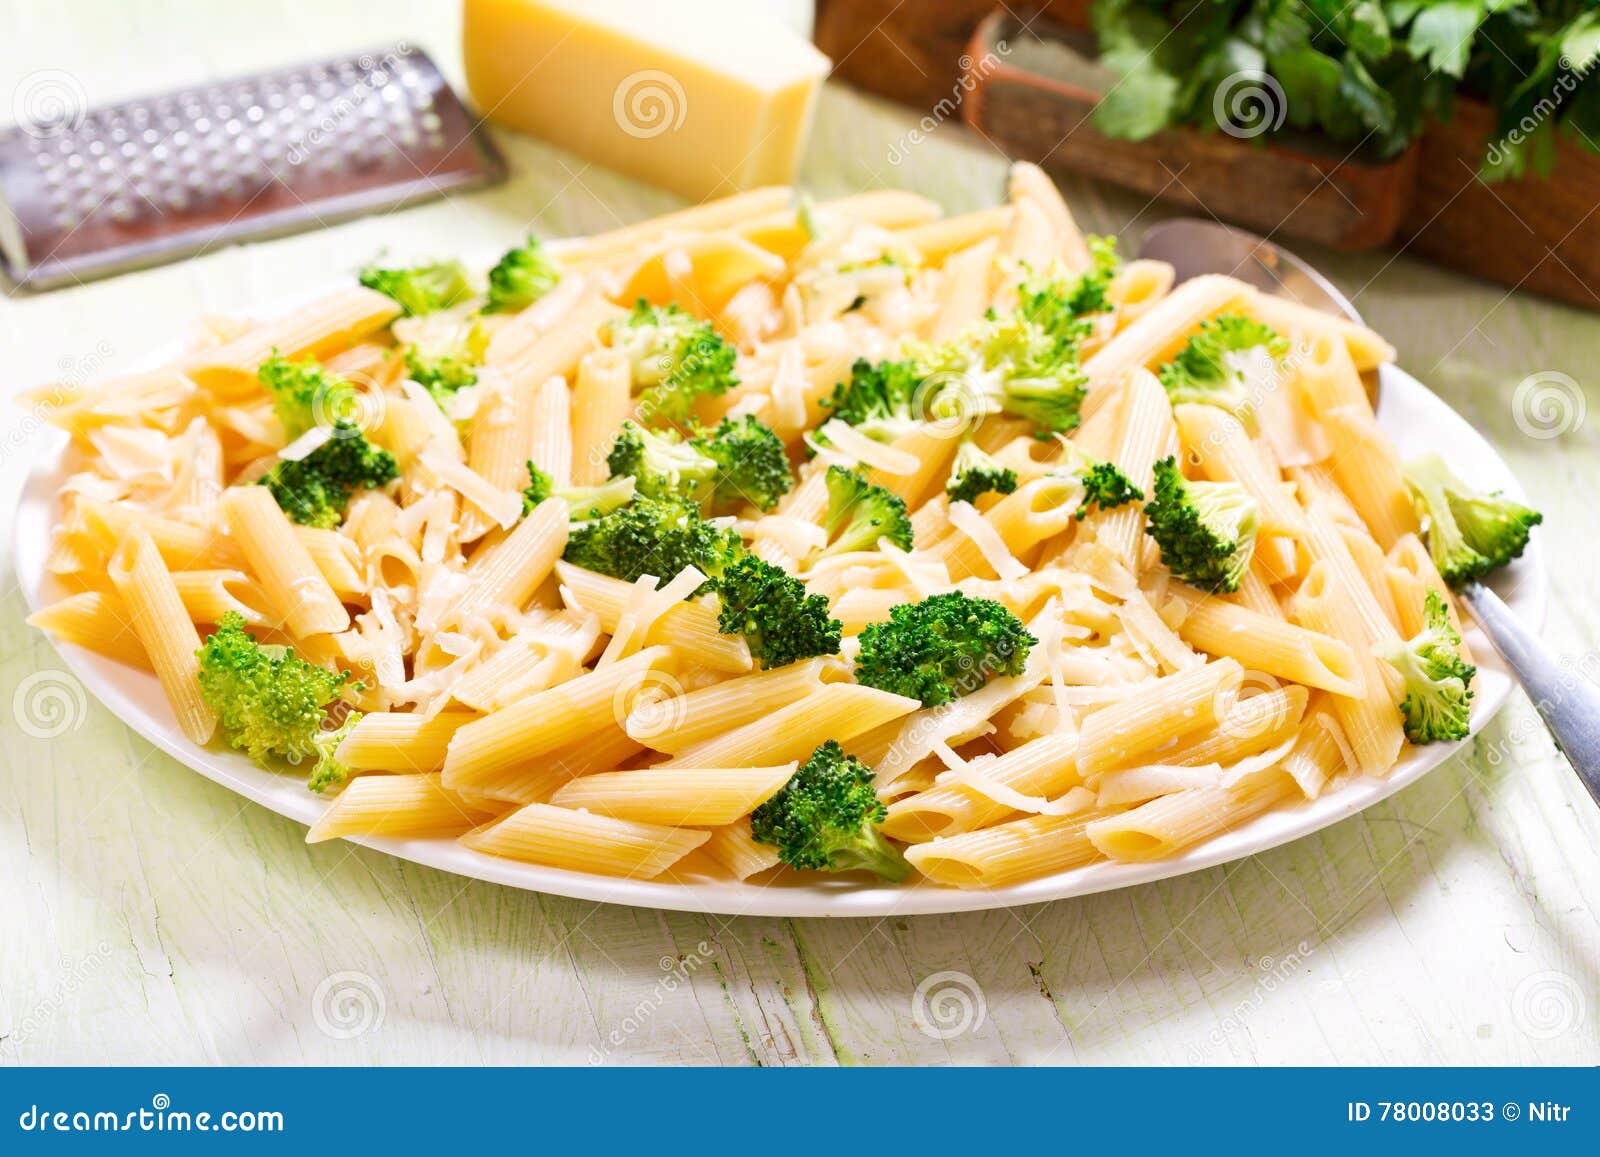 Penne pasta with broccoli stock image. Image of object - 78008033